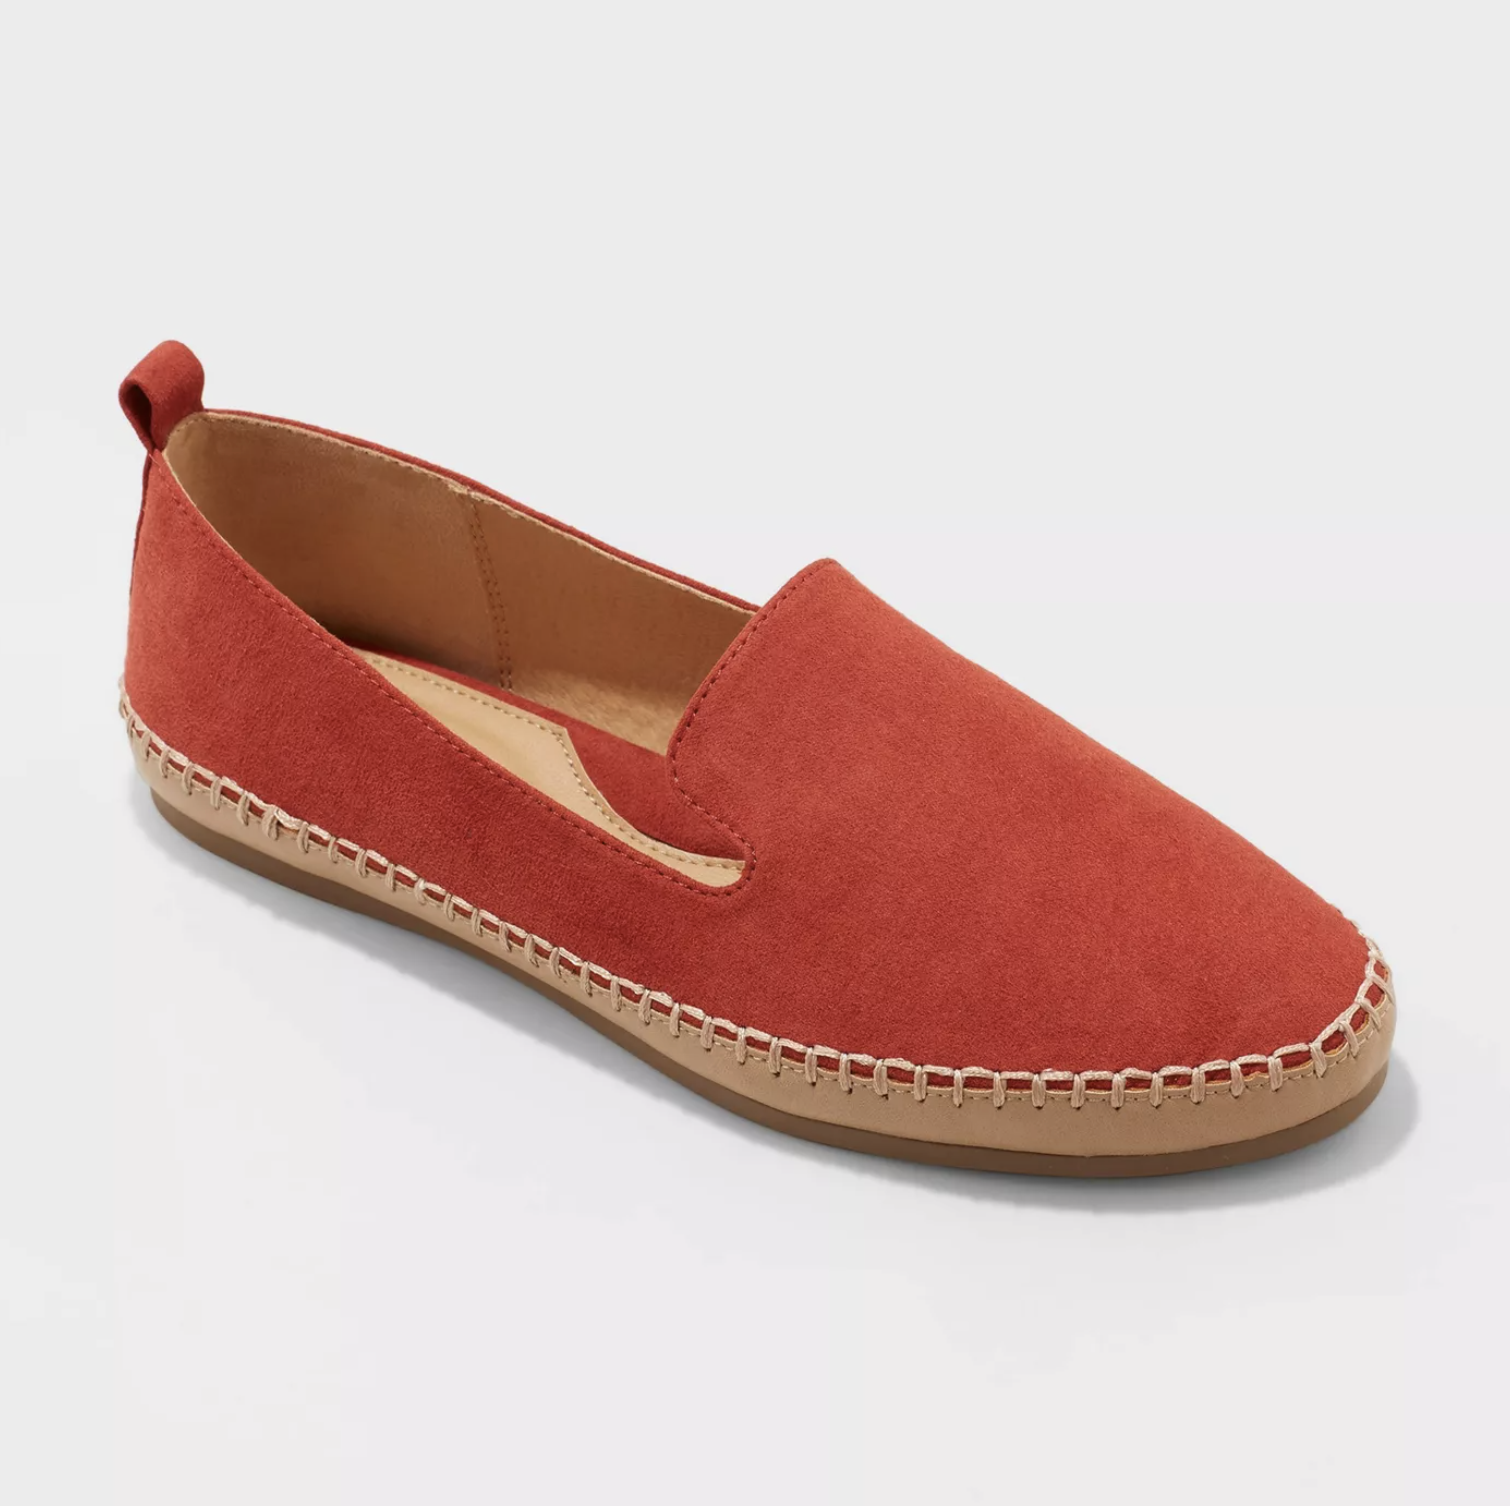 The red slip on flats have white stitching along the edges toward the sole